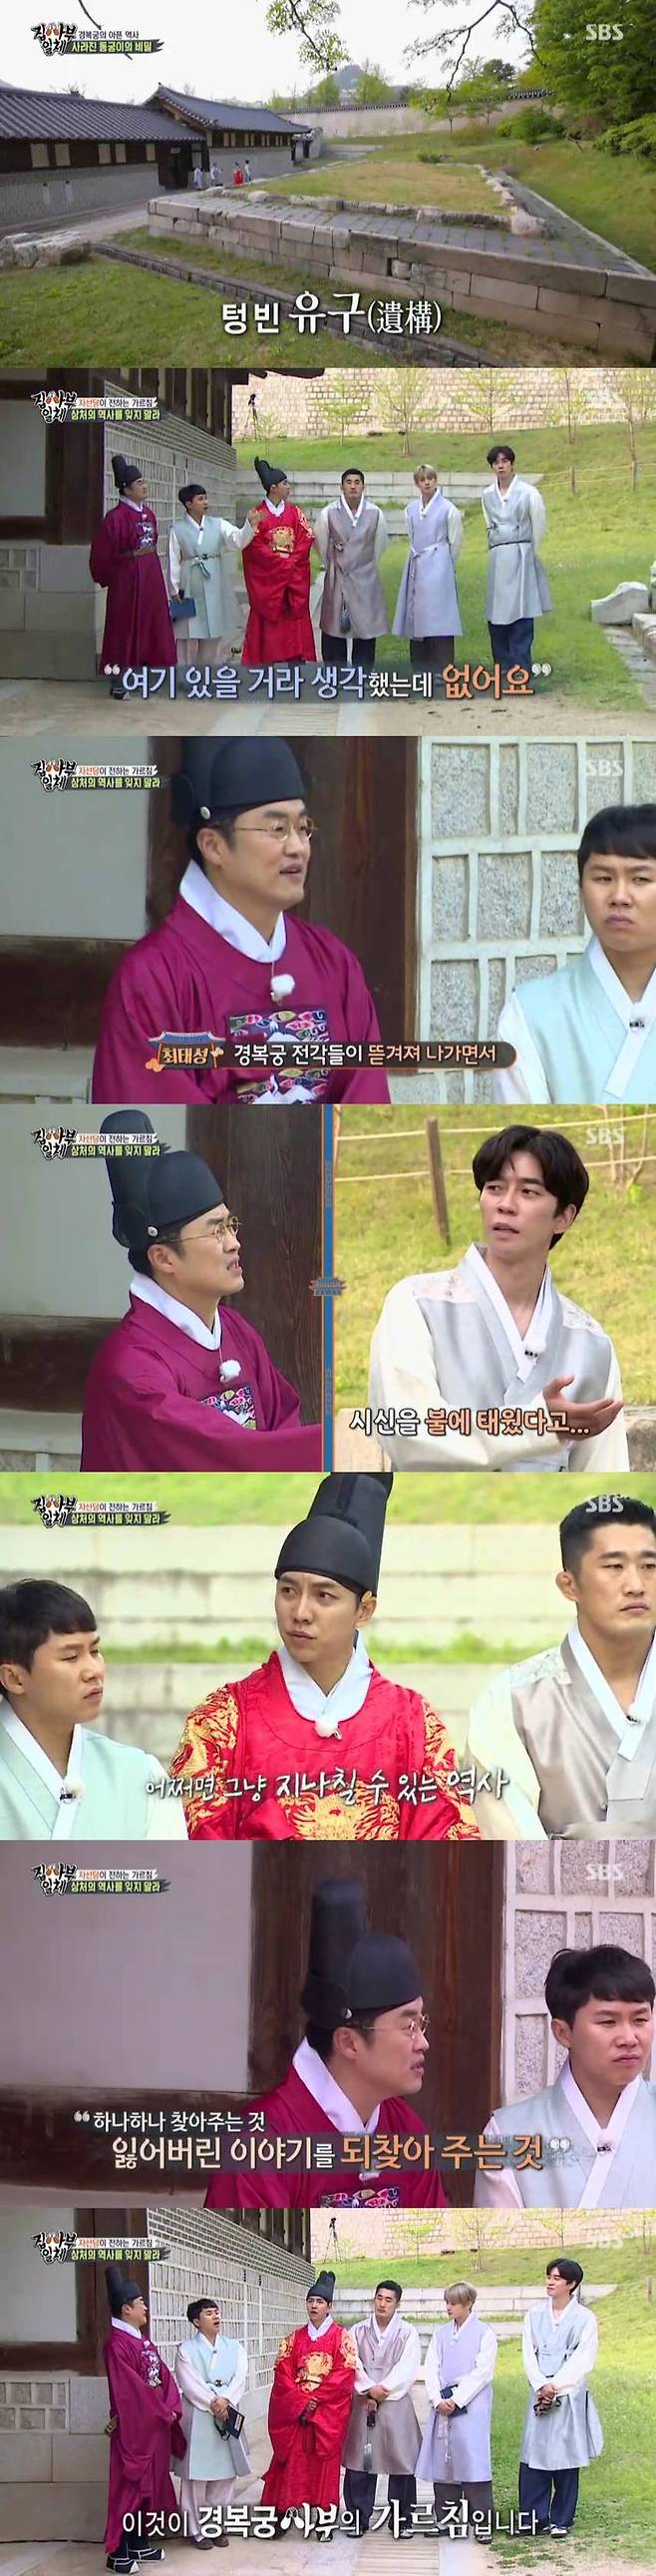 All The Butlers was the first person ever to appear, not a man, Palace (Palace) Master, to capture both fun and meaning.According to Nielsen Korea, a ratings agency on March 3, SBS All The Butlers, which was broadcast on the 2nd, recorded 4.1% of the first part and 4% of the second part.The 2049 target audience rating, which is a topic and competitiveness indicator, rose to 2.1% and the highest audience rating per minute rose to 5.5%.The master who appeared on the show was Gyeongbokgung.In the appearance of the first non-personal master of All The Butlers, the members expressed their feelings, saying, It seems to be the first and best master.In addition, Choi Tae-seong, a Korean history star lecturer, was in charge of history, and Kim Kang-hoon, a child actor, was accompanied by Goodbye My Princess.Especially, this filming was the first time that the entire Gyeongbokgung was licensed, and it was opened to the inside of the Geunjeongjeon and the second floor of the gyeonghoeru which can not be easily entered.Members looked back at Gyeongbokgung following Choi Tae-seong and Goodbye My Princess.Choi Tae-seong said: If you look well there are stories of many people who lived here in the building.I think meeting the story is the will of Master Gyoungbokgung. Members looked inside the Geunjeongjeon and from gyeonghoeru to the Charity Party and the Guncheong Palace.Choi Tae-seong explained about the palace as the space where the Chest sick Empress Myeongseong was killed and the members said Suddenly Chest is sick.Goodbye My Princess also said, I think it was too scary, I learned it from textbooks, but it is even worse when I come.Lee Seung-gi said, I thought it was a splendid place with a king, but it seems to be a place where people live in the end.While continuing to spend time at Gyeongbokgung, Goodbye My Princess, who was with the members, suddenly disappeared and embarrassed everyone.At this time, an unrelated person appeared with a diary of Goodbye My Princess, Please find Goodbye My Princess with these clues.Goodbye My Princess must be in Gyongbokgung. The diary read, I am called Goodbye My Princess, the palace built in 1427, the palace in the east.The members found out that Goodbye My Princess was not a person but a charity party.The members followed the diary clues to the charity party, where a second diary was placed in front of the charity party, which contained a shocking past that the Japanese auctioned Gyoungbokgung.The members said, It was about 100 years ago, and they could not easily say, I did not know that Gyeongbokgung was auctioned and torn it to Japan.Since then, the members have been looking for the original charity hall and heading to the backyard of the palace, but there was only a place left.Choi Tae-seong told the Chest sick story of the philanthropy being reduced to a Japanese private art museum as the gyeongbokgung pavilions were auctioned off.In 1923, the Kanto earthquake caused the charity to eventually disappear into a fire.After that, Professor Kim Jung-dong, who tried to rebuild his bitter history without forgetting, told the back story that he was able to return the neglected stone to Gyongbokgung.In addition, Choi Tae-seong told everyone that the backyard of the Guncheong Palace, which moved the charitable hall, was a place where Empress Myeongseong was buried and burned.Shin Sung-rok said, If we did not know this, we would just see it even if we came to Gyongbokgung.Choi Tae-seong said, Before the stonework of the charity party came back, the history of the charity party was erased.I recovered this and restored the story of the Charity Party by putting it back. It is our mission to restore the lost history by finding one by one, restoring the lost story, and to pass on to the future.This is the teaching of Master Gyeongbokgung. Following the painful history of Chest, which was hidden on this day, the scene of the teachings of Master Gyeongbokgung reminded me of the meaning and took the best one minute with 5.5% per minute.